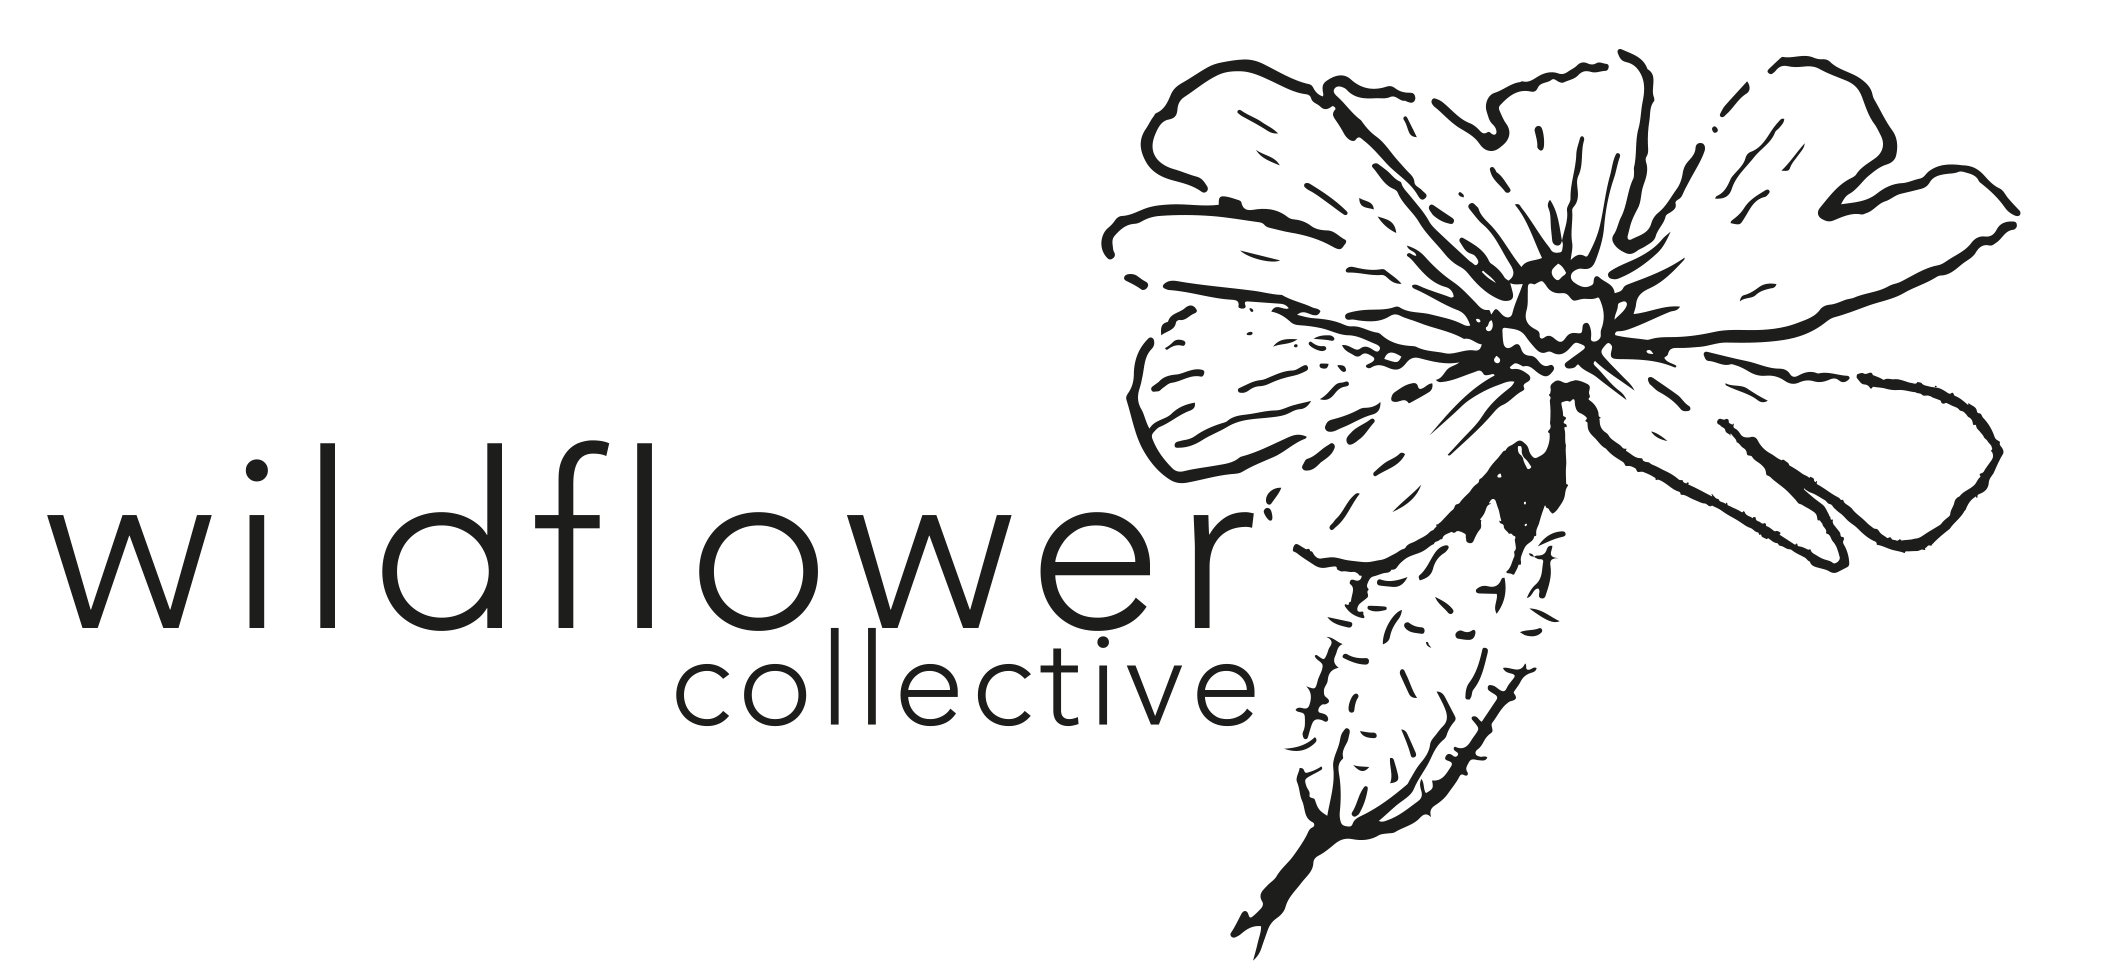 A dating agency for wildflower meadows Wildflower Collective